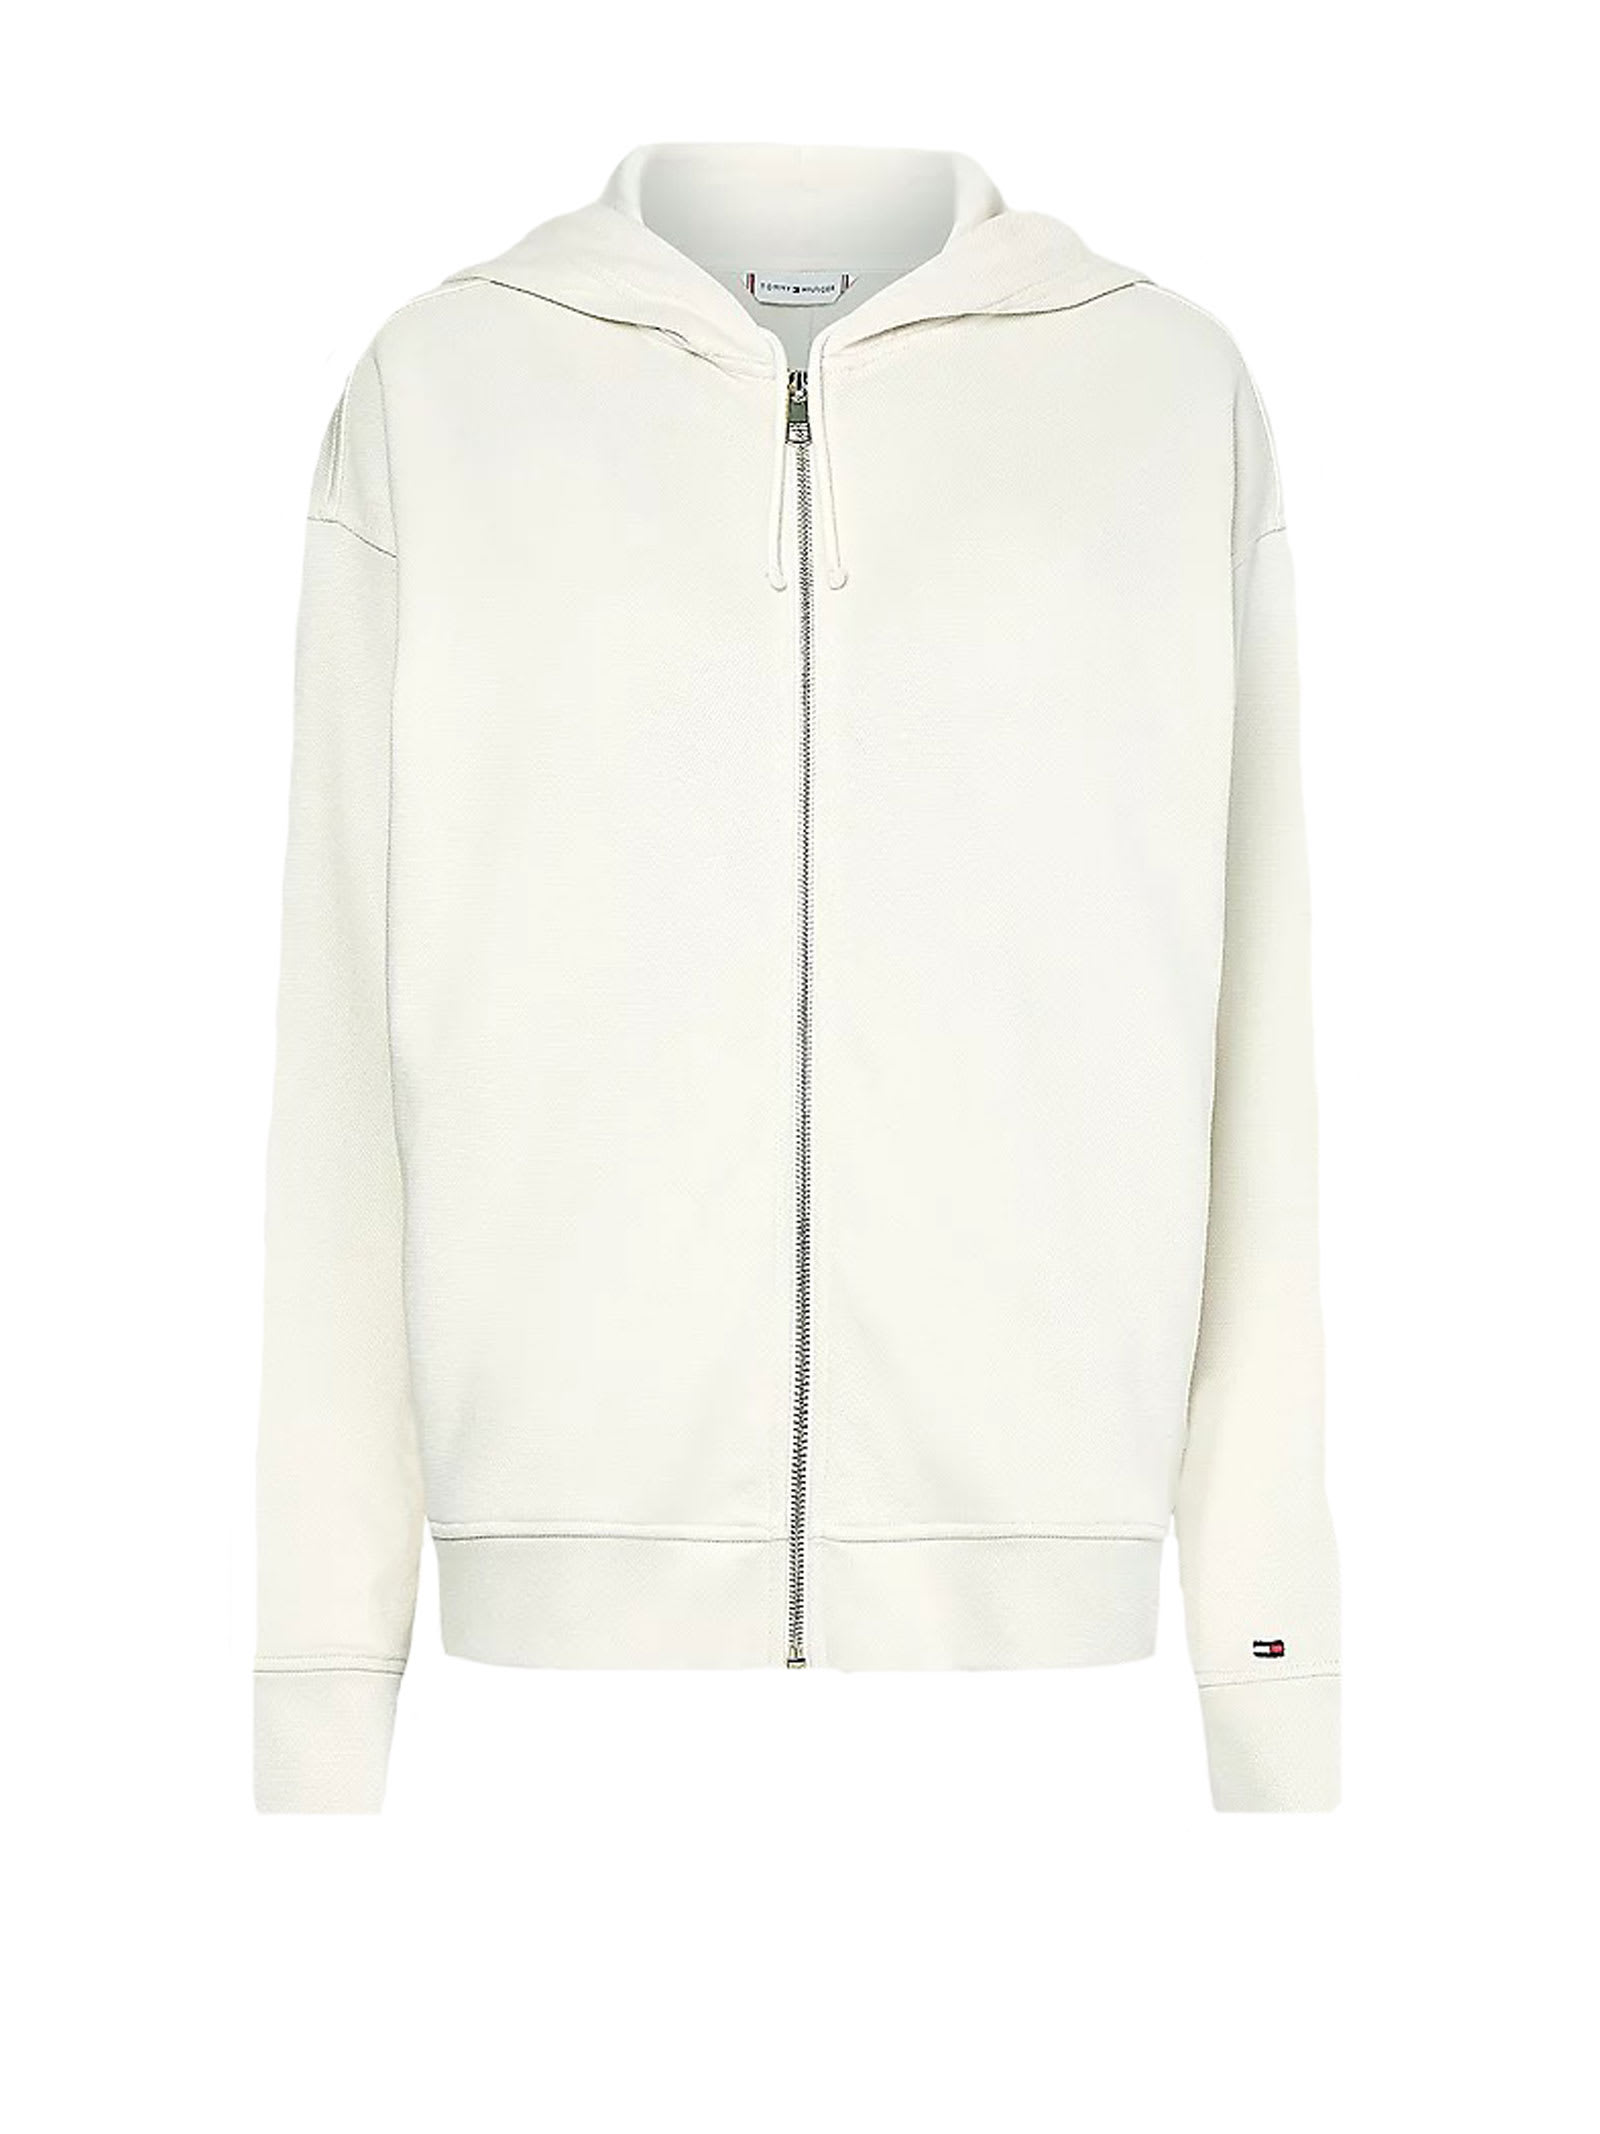 Tommy Hilfiger Hoodie In White Cream Colored